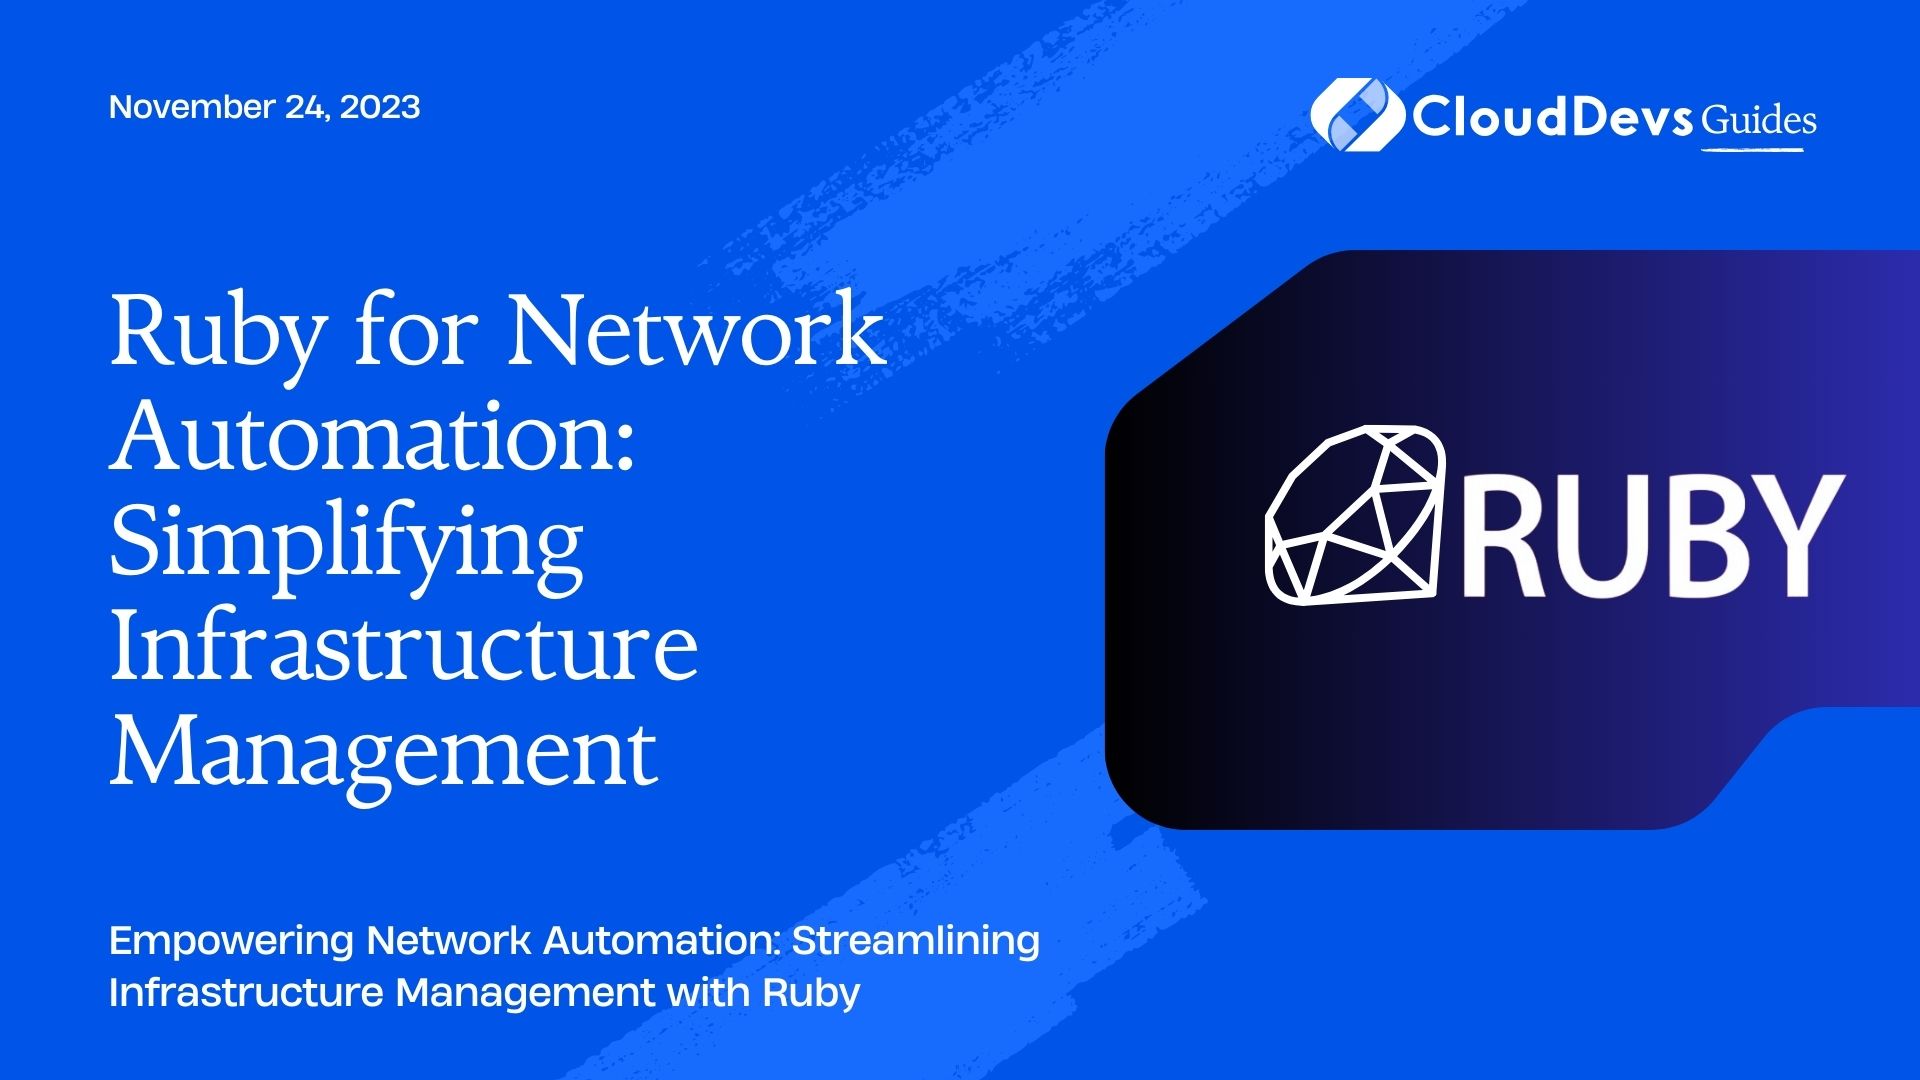 Ruby for Network Automation: Simplifying Infrastructure Management